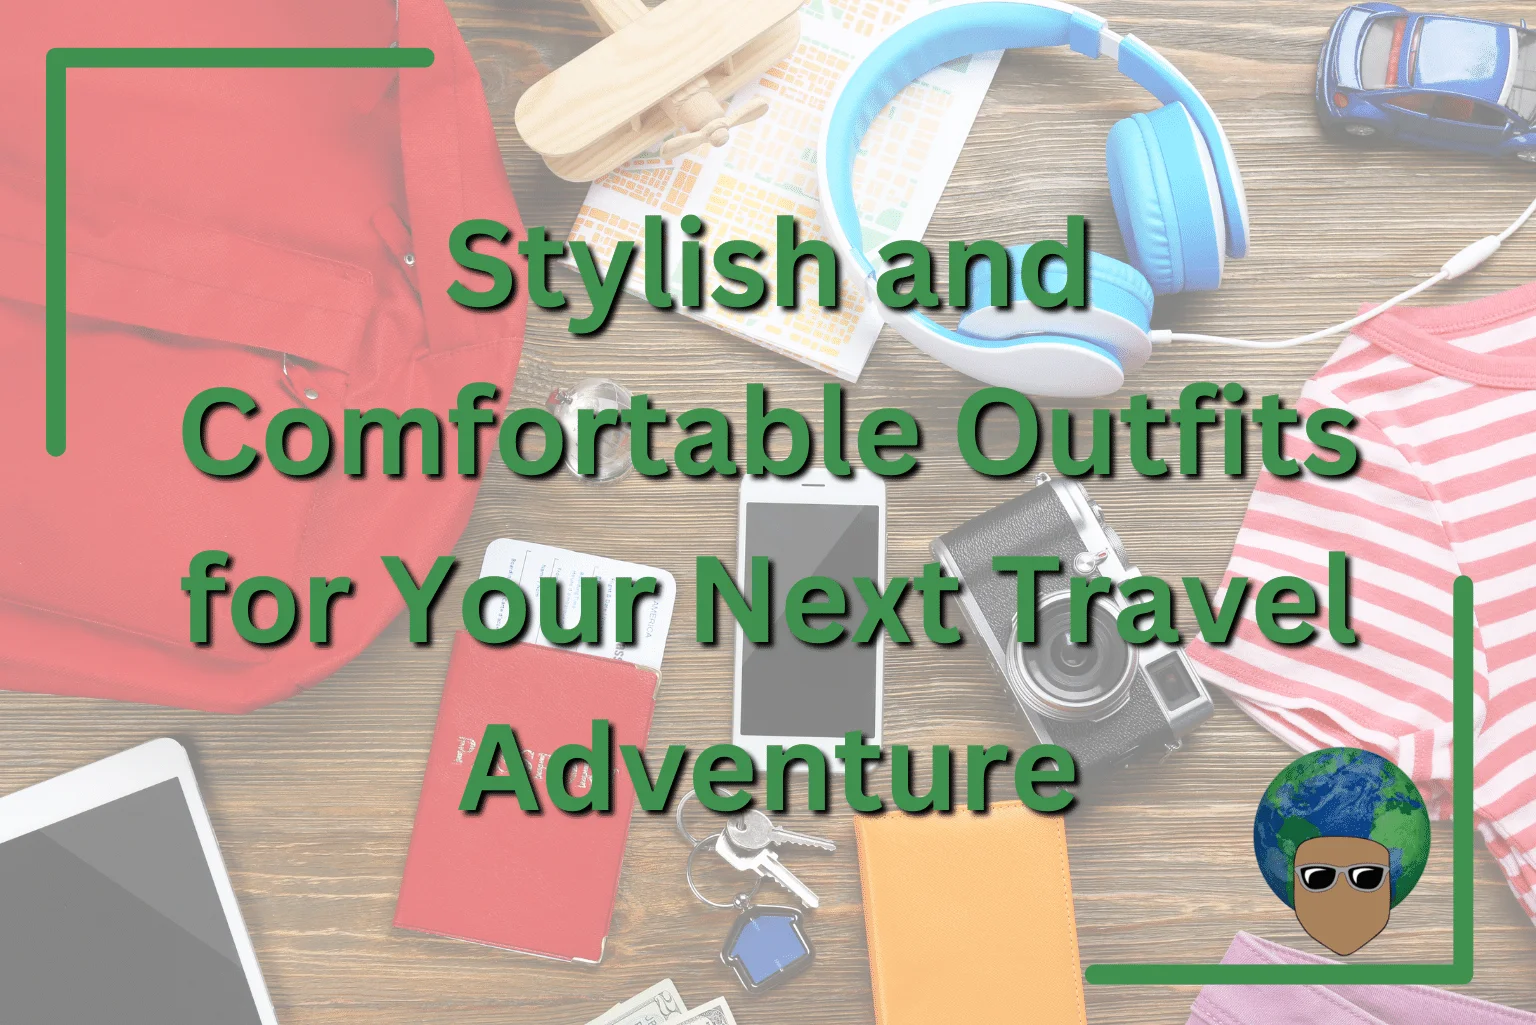 You are currently viewing Stylish and Comfortable Outfits for Your Next Travel Adventure